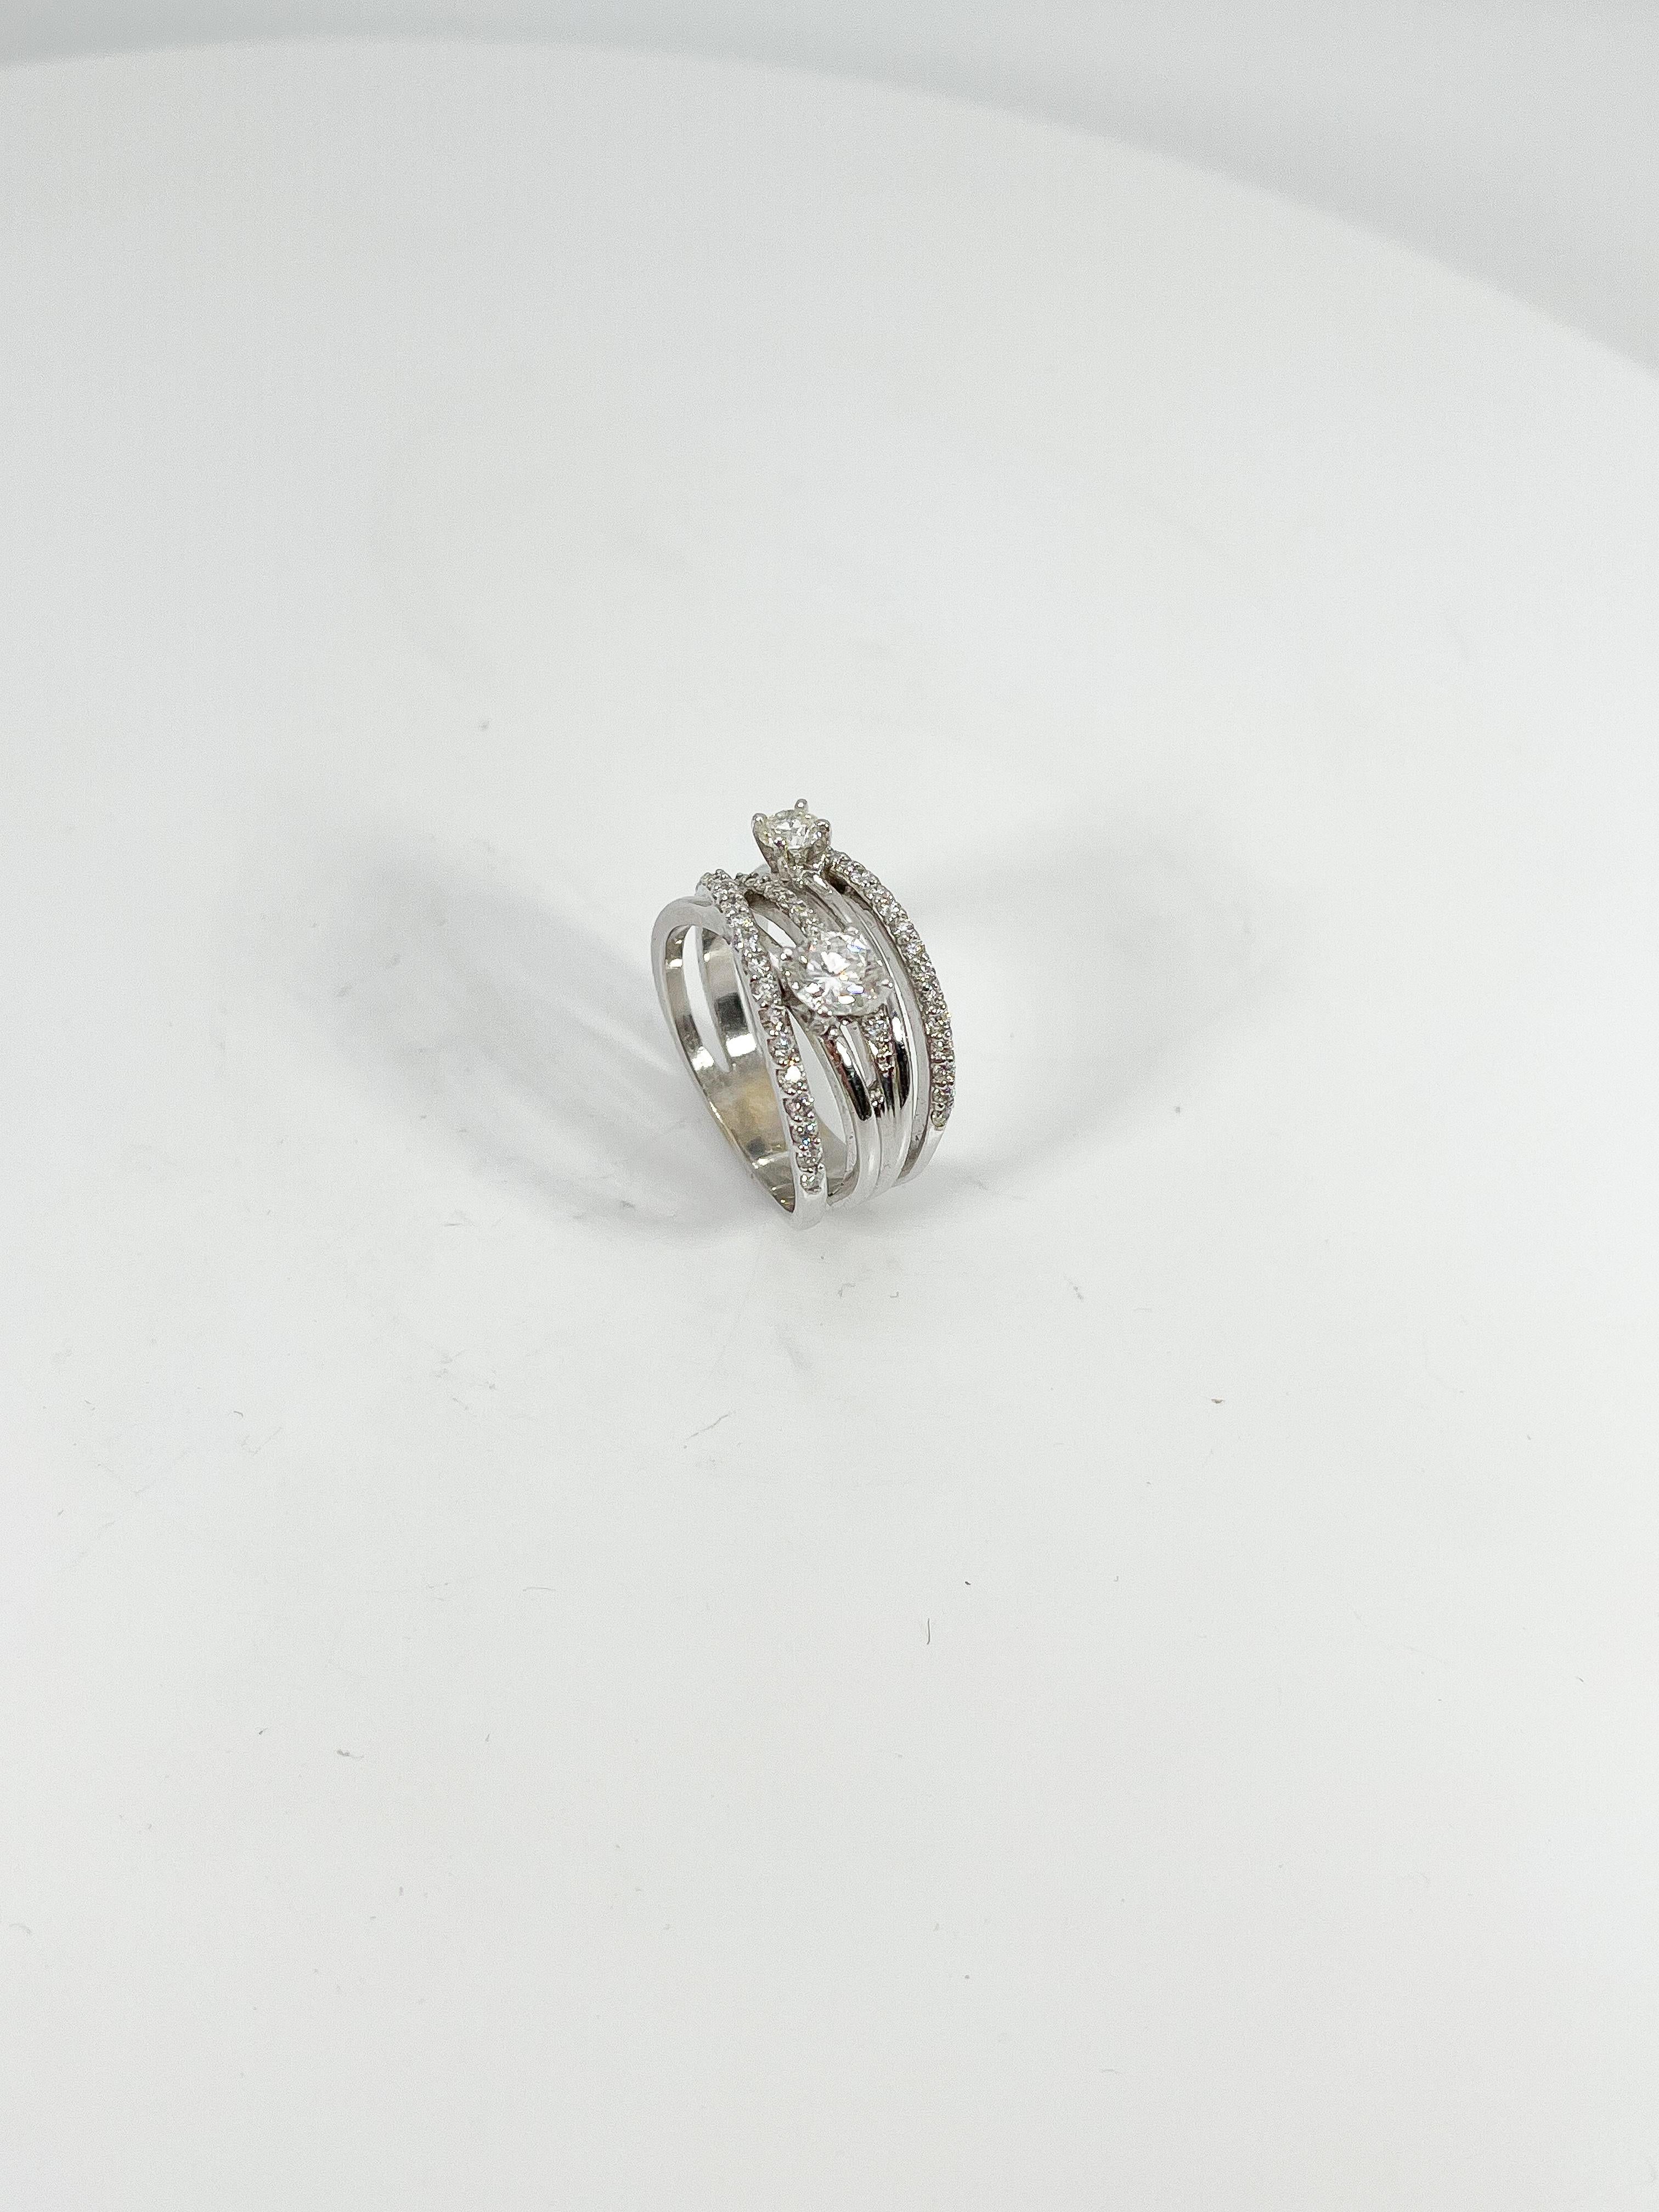 14k white gold 1.5 CTW diamond fashion crossover ring. Two larger diamonds are .50 CTS and .15 CTS. The melee diamonds are .85 CTW. The ring is 11.1 mm in width, measures to be a size 6 3/4, and has a weight of 7.6 grams 